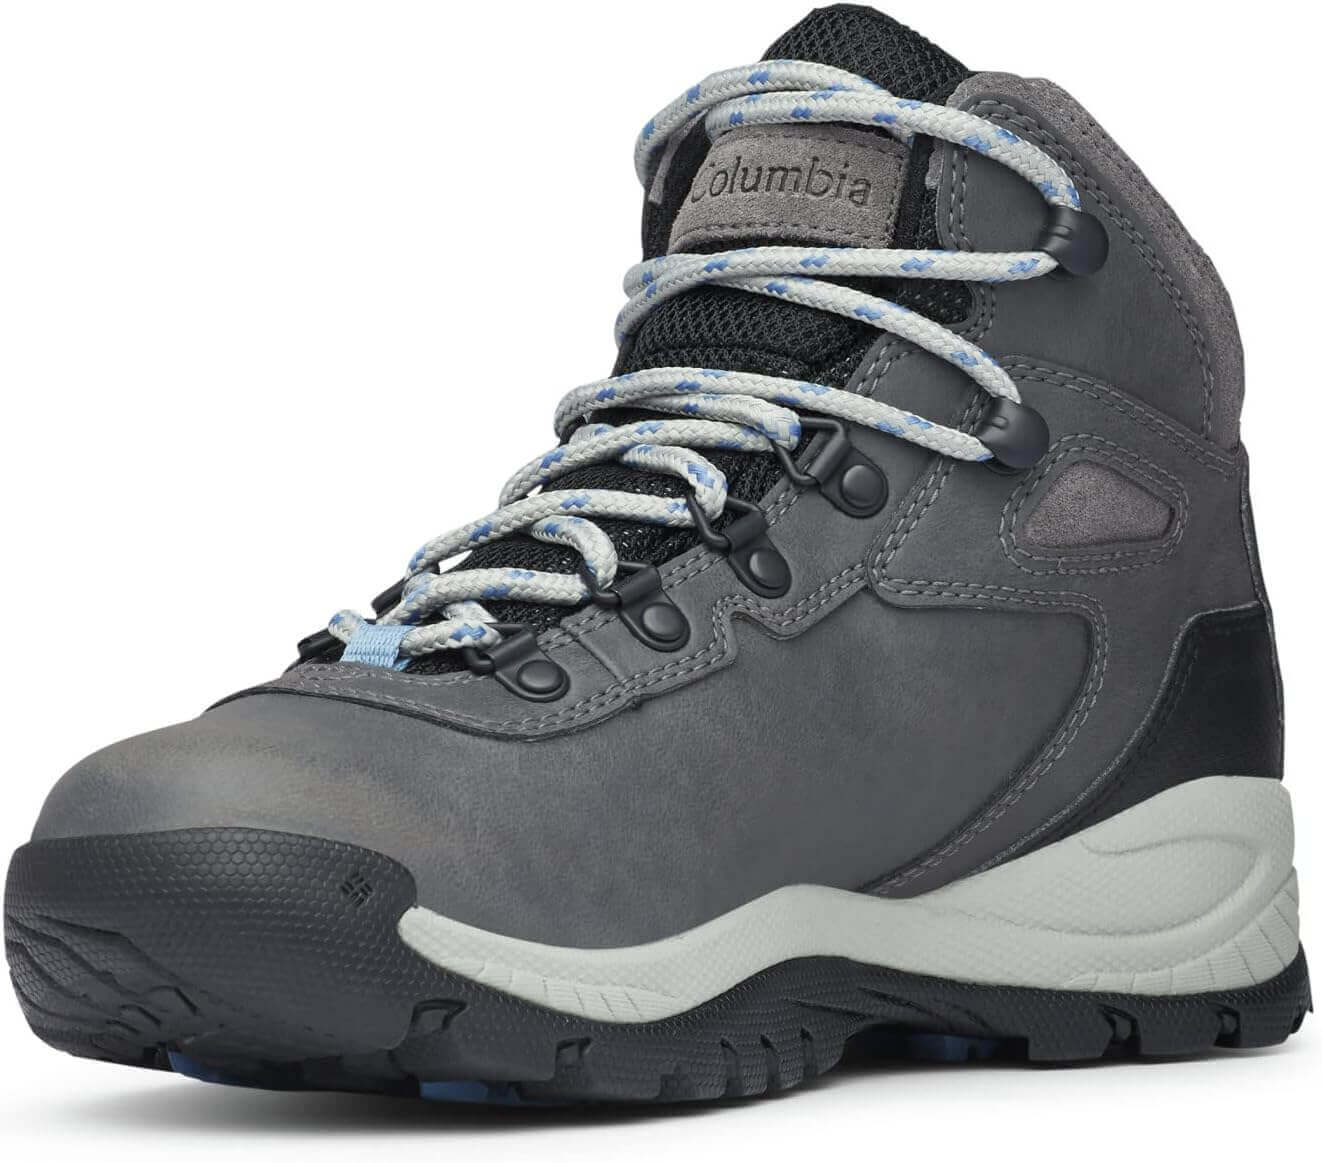 Shop The Latest >Columbia Women's Newton Ridge Waterproof Hiking Boot > *Only $121.43*> From The Top Brand > *Columbial* > Shop Now and Get Free Shipping On Orders Over $45.00 >*Shop Earth Foot*